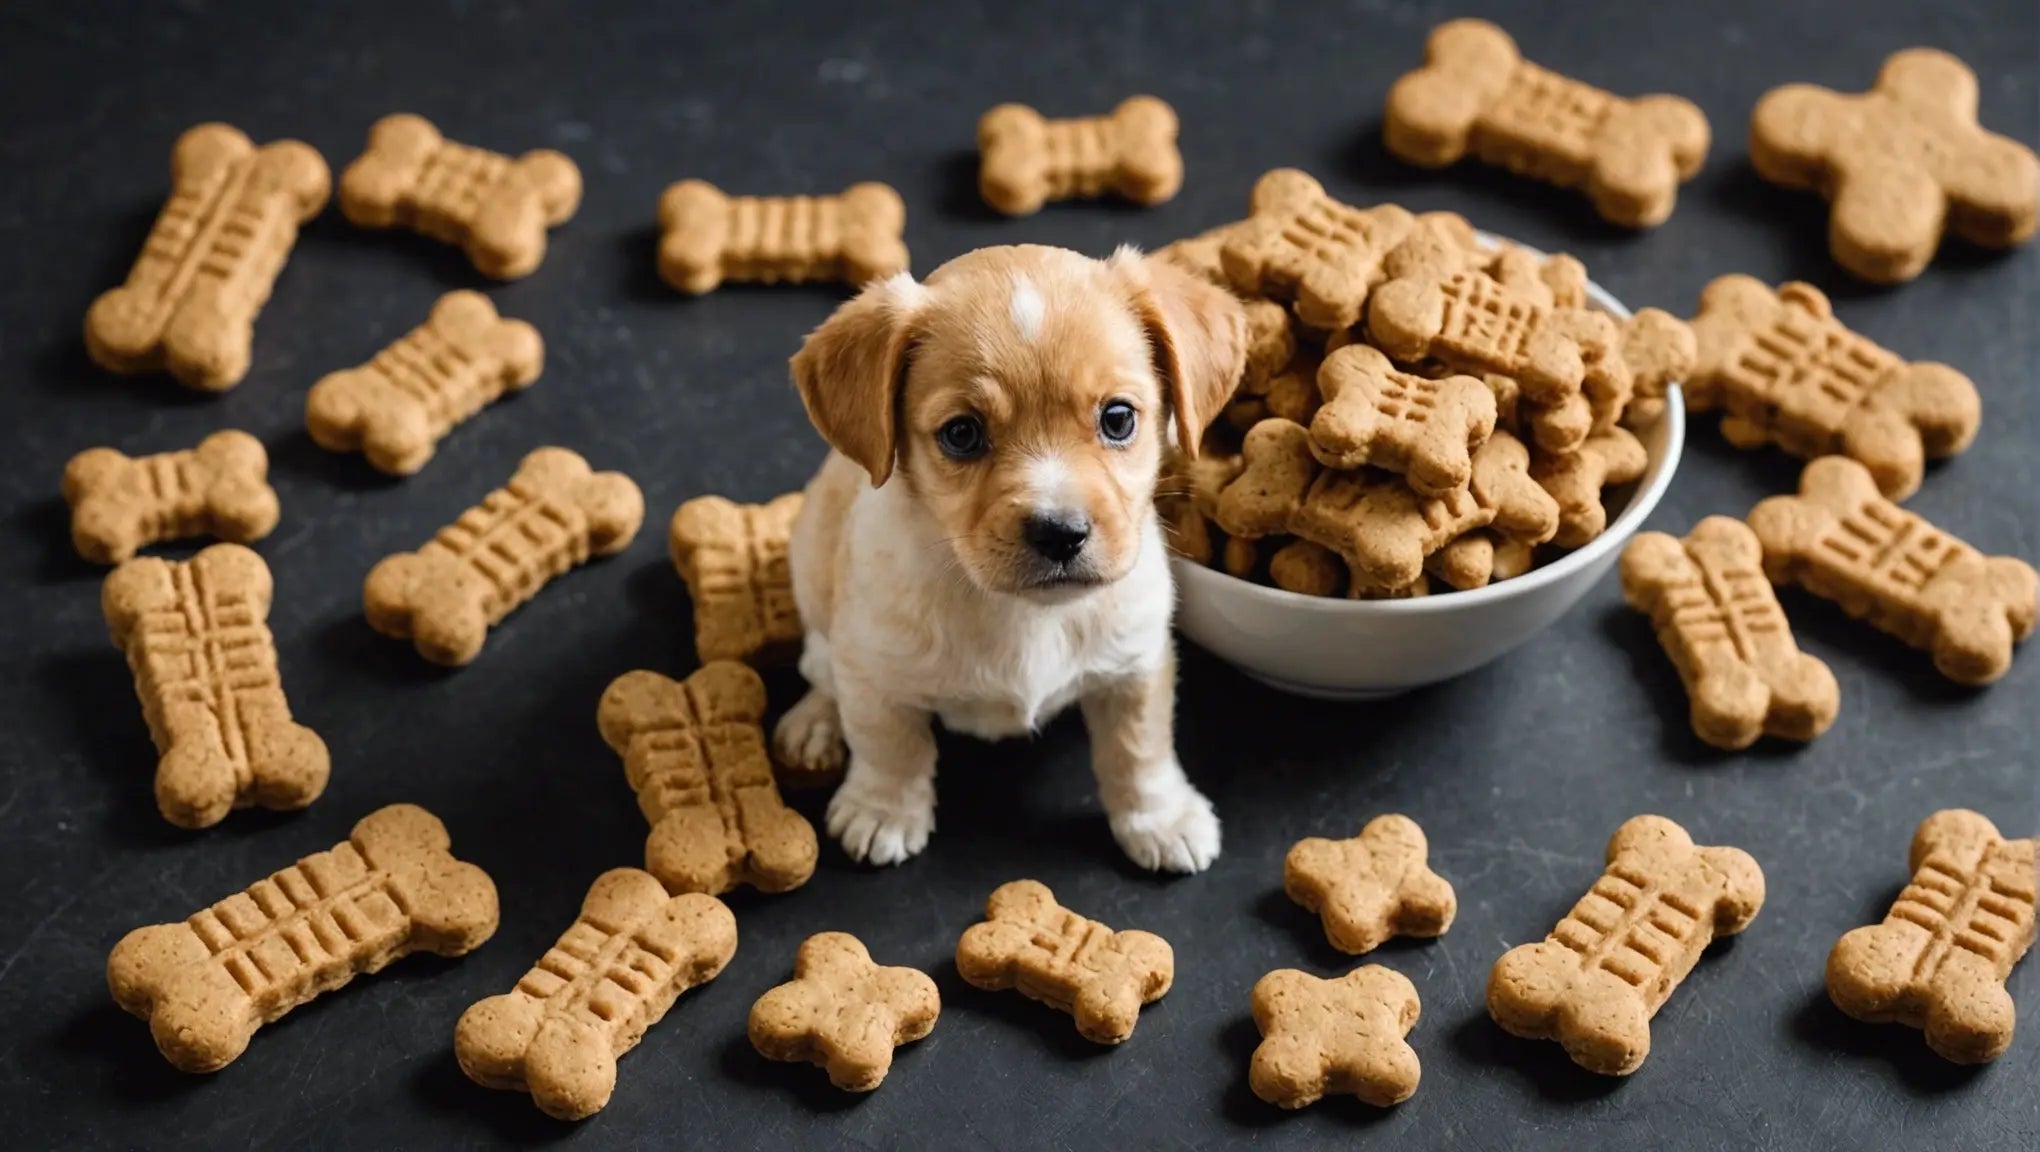 10 Best Dog Treats for Training Your Puppy